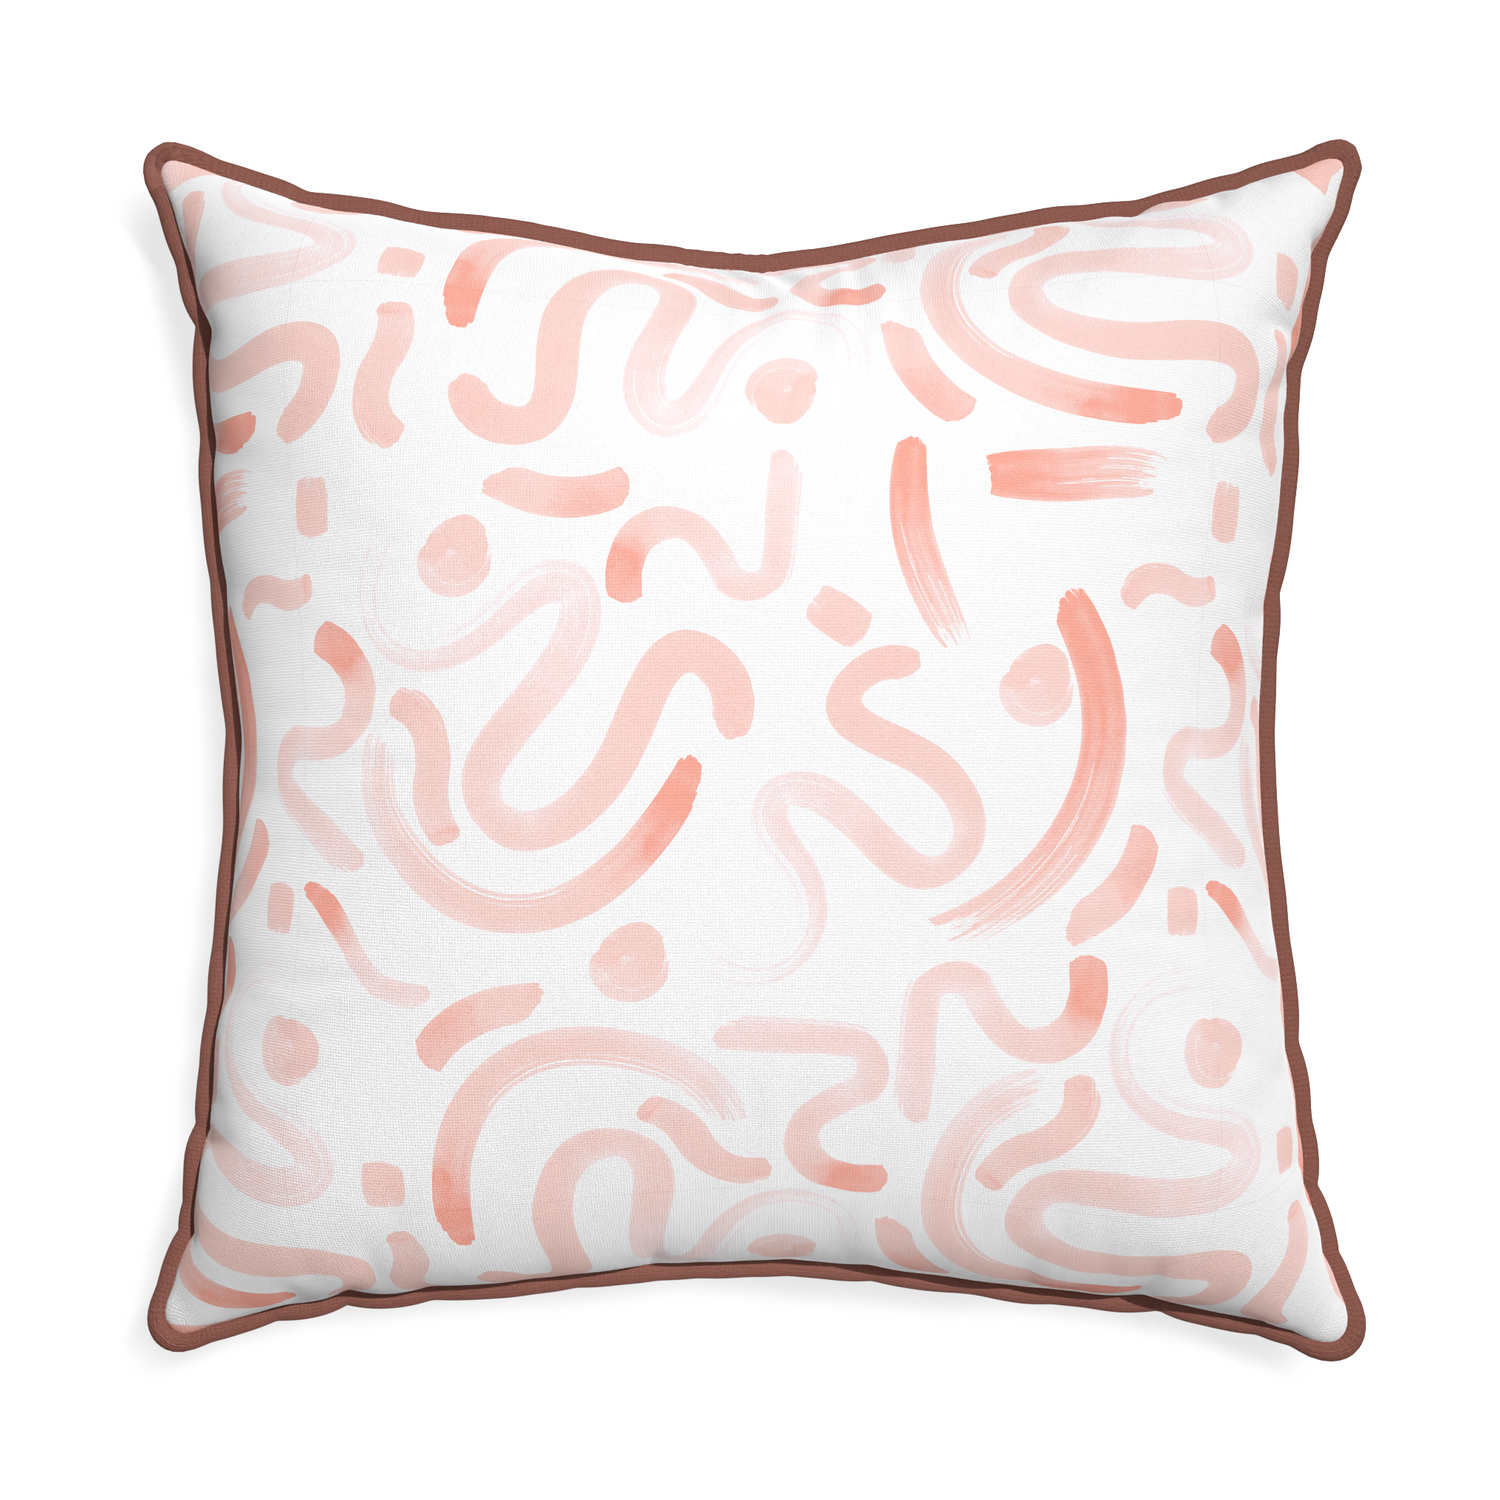 Euro-sham hockney pink custom pillow with w piping on white background